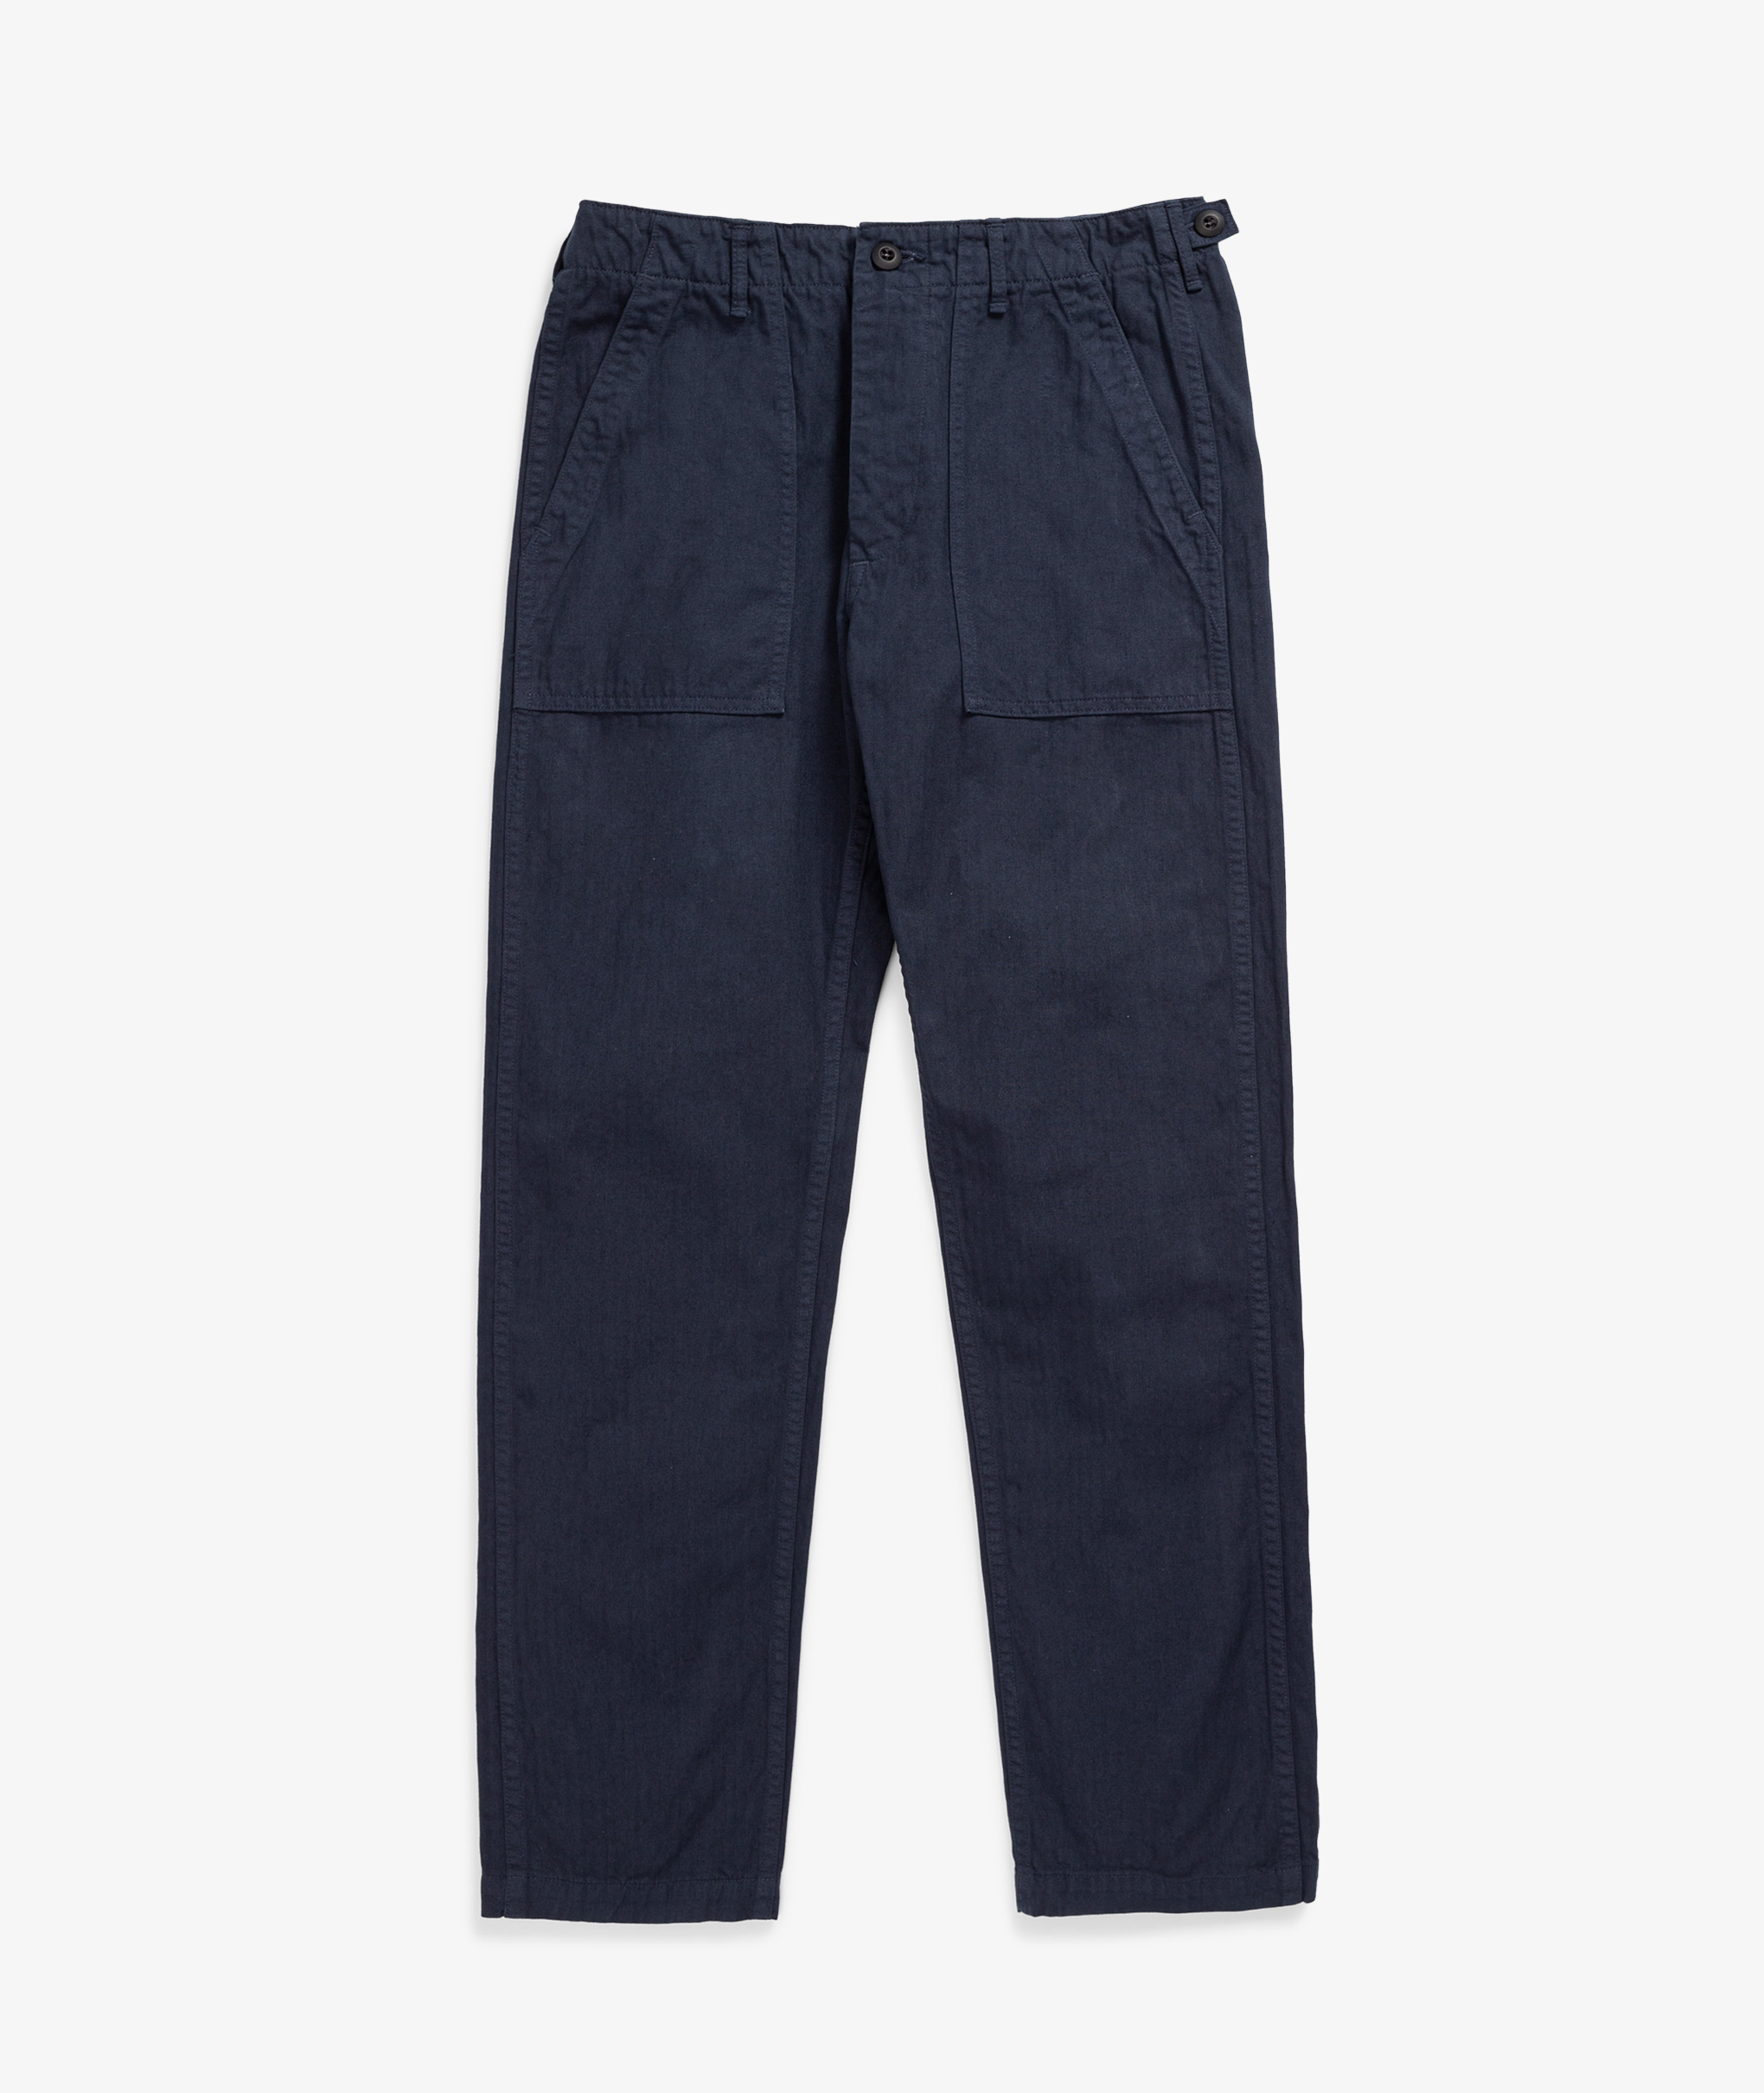 Norse Store | Shipping Worldwide - orSlow Slim Fit Fatigue Pant - Dark Navy